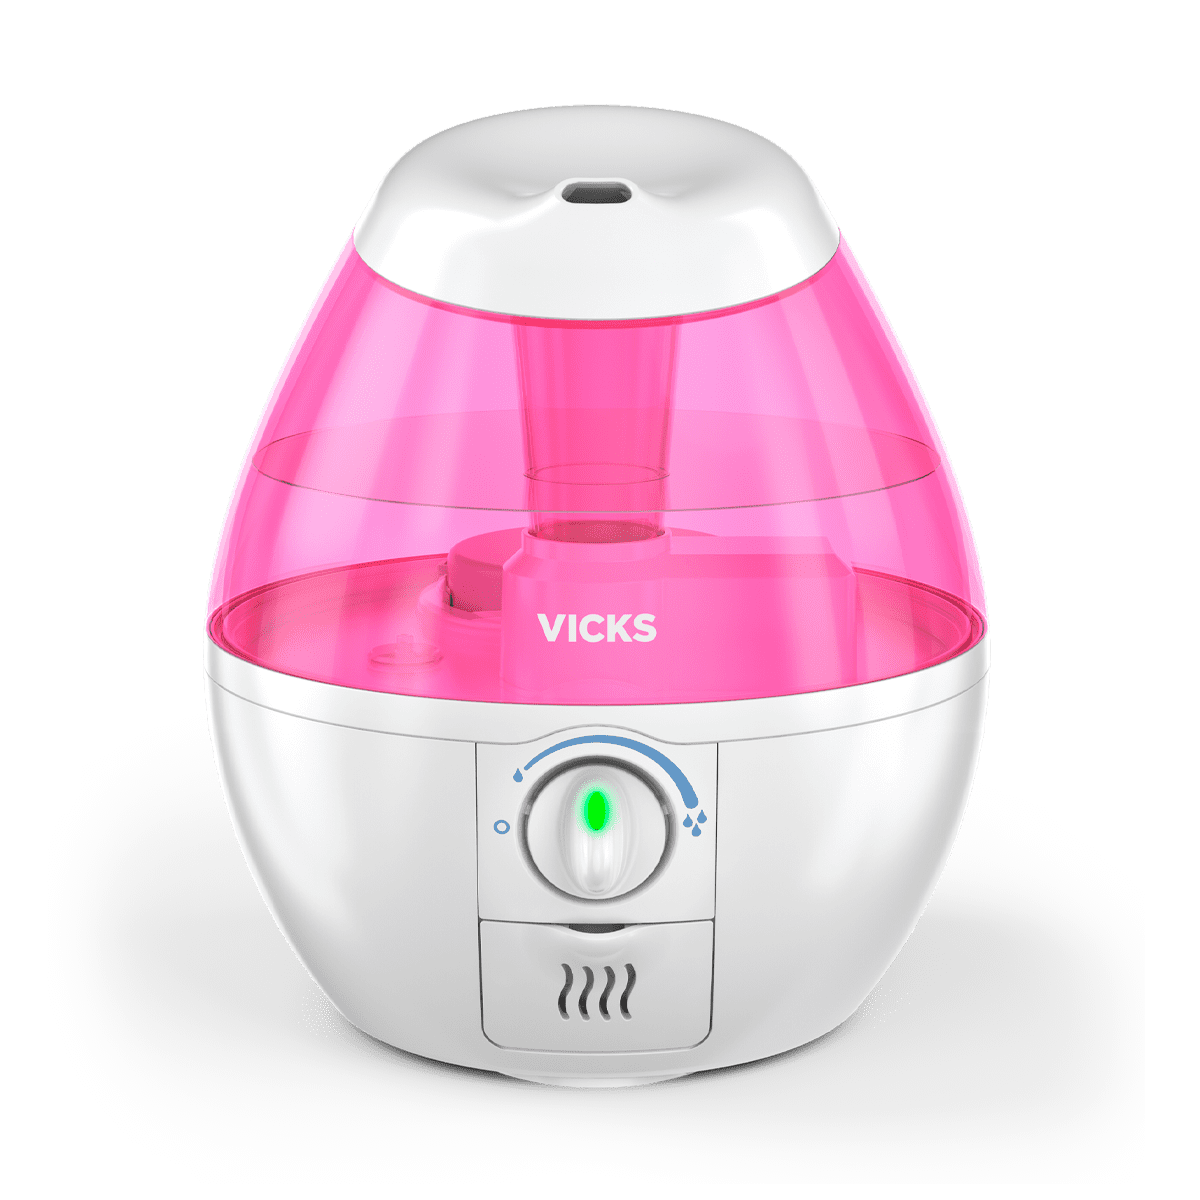 Vicks Mini Filter Free Cool Mist Humidifier Small Humidifier for Bedrooms,  Baby, Kids Rooms, Auto-Shut Off, 0.5 Gallon Tank for 20 Hours of